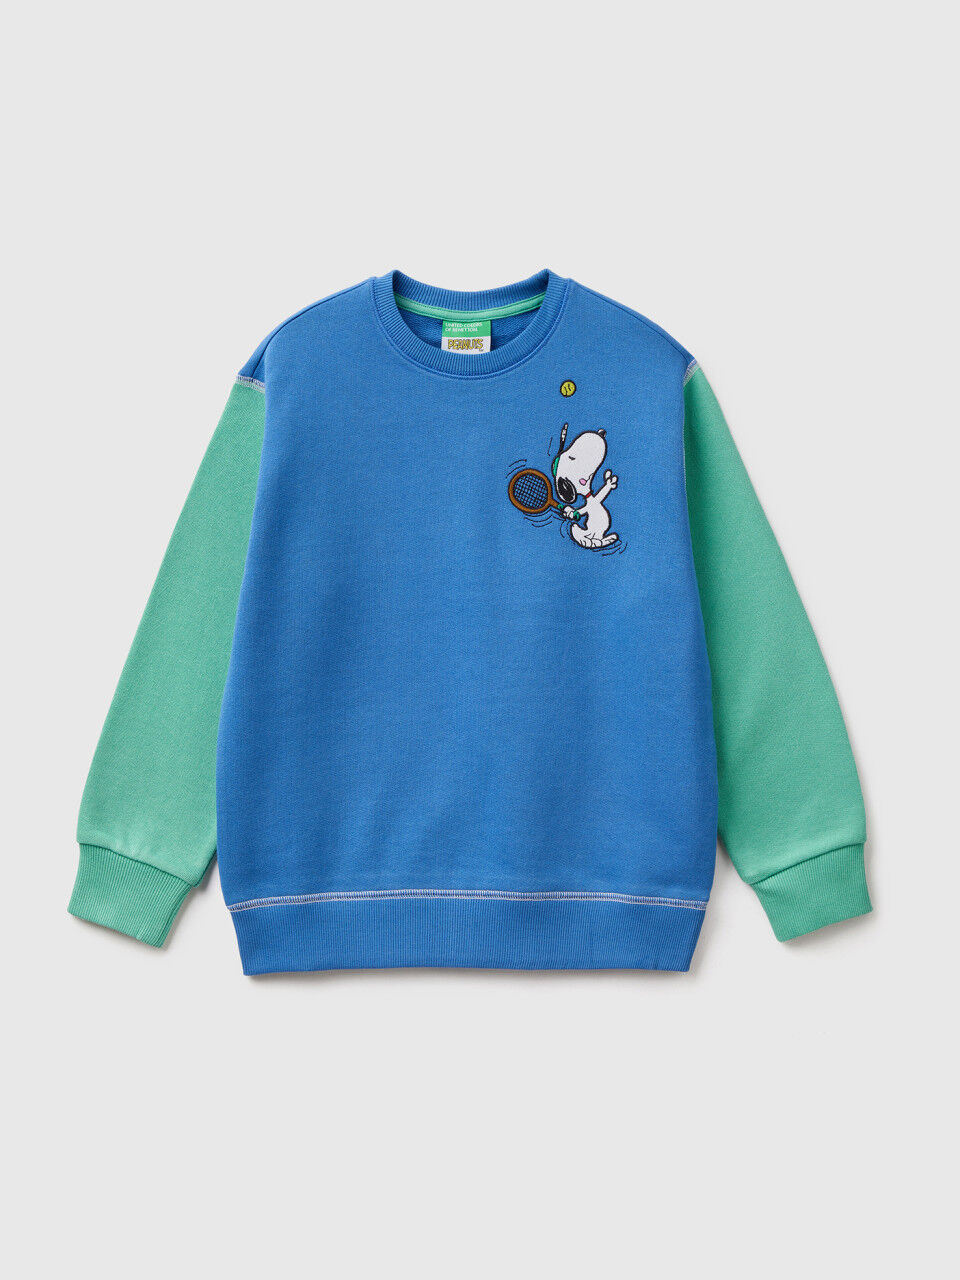 Sweatshirt with Snoopy embroidery